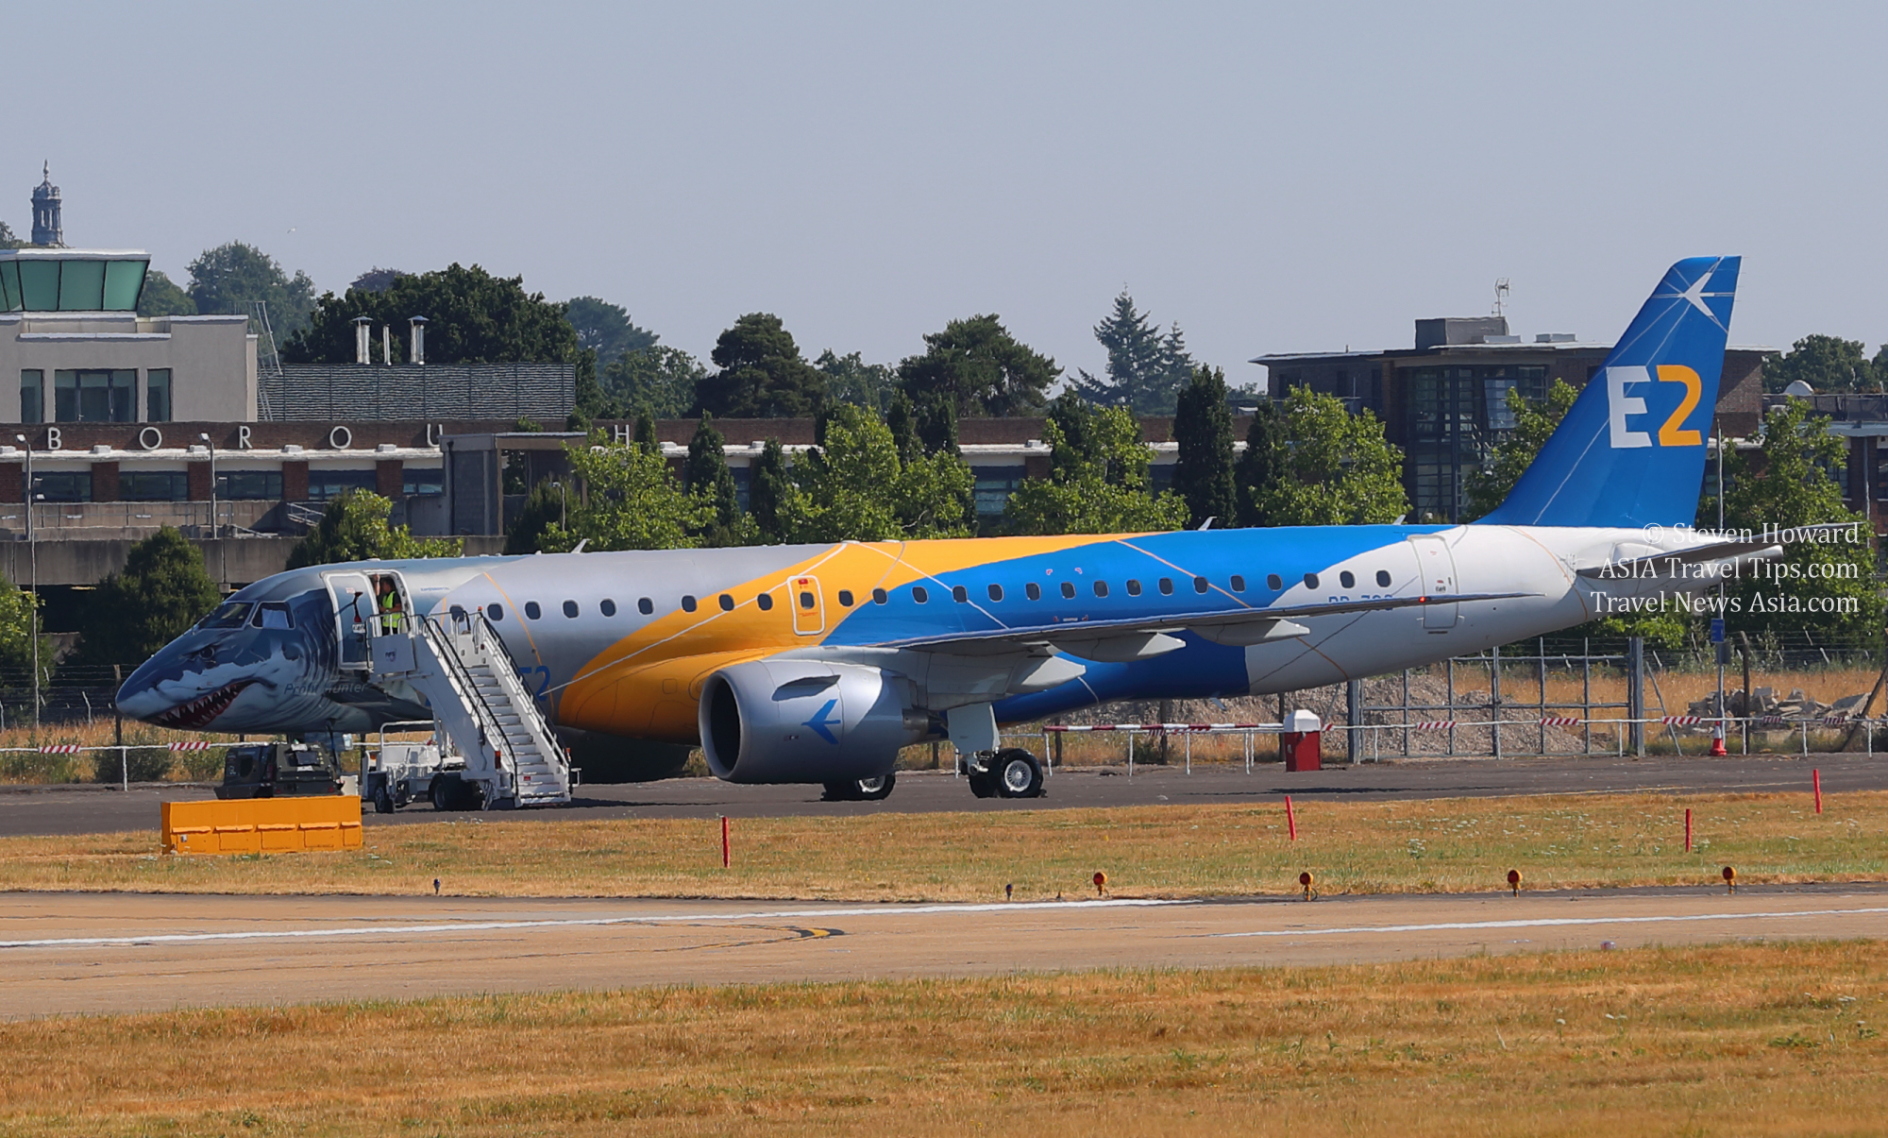 Embraer E195-E2. Picture by Steven Howard of TravelNewsAsia.com Click to enlarge.